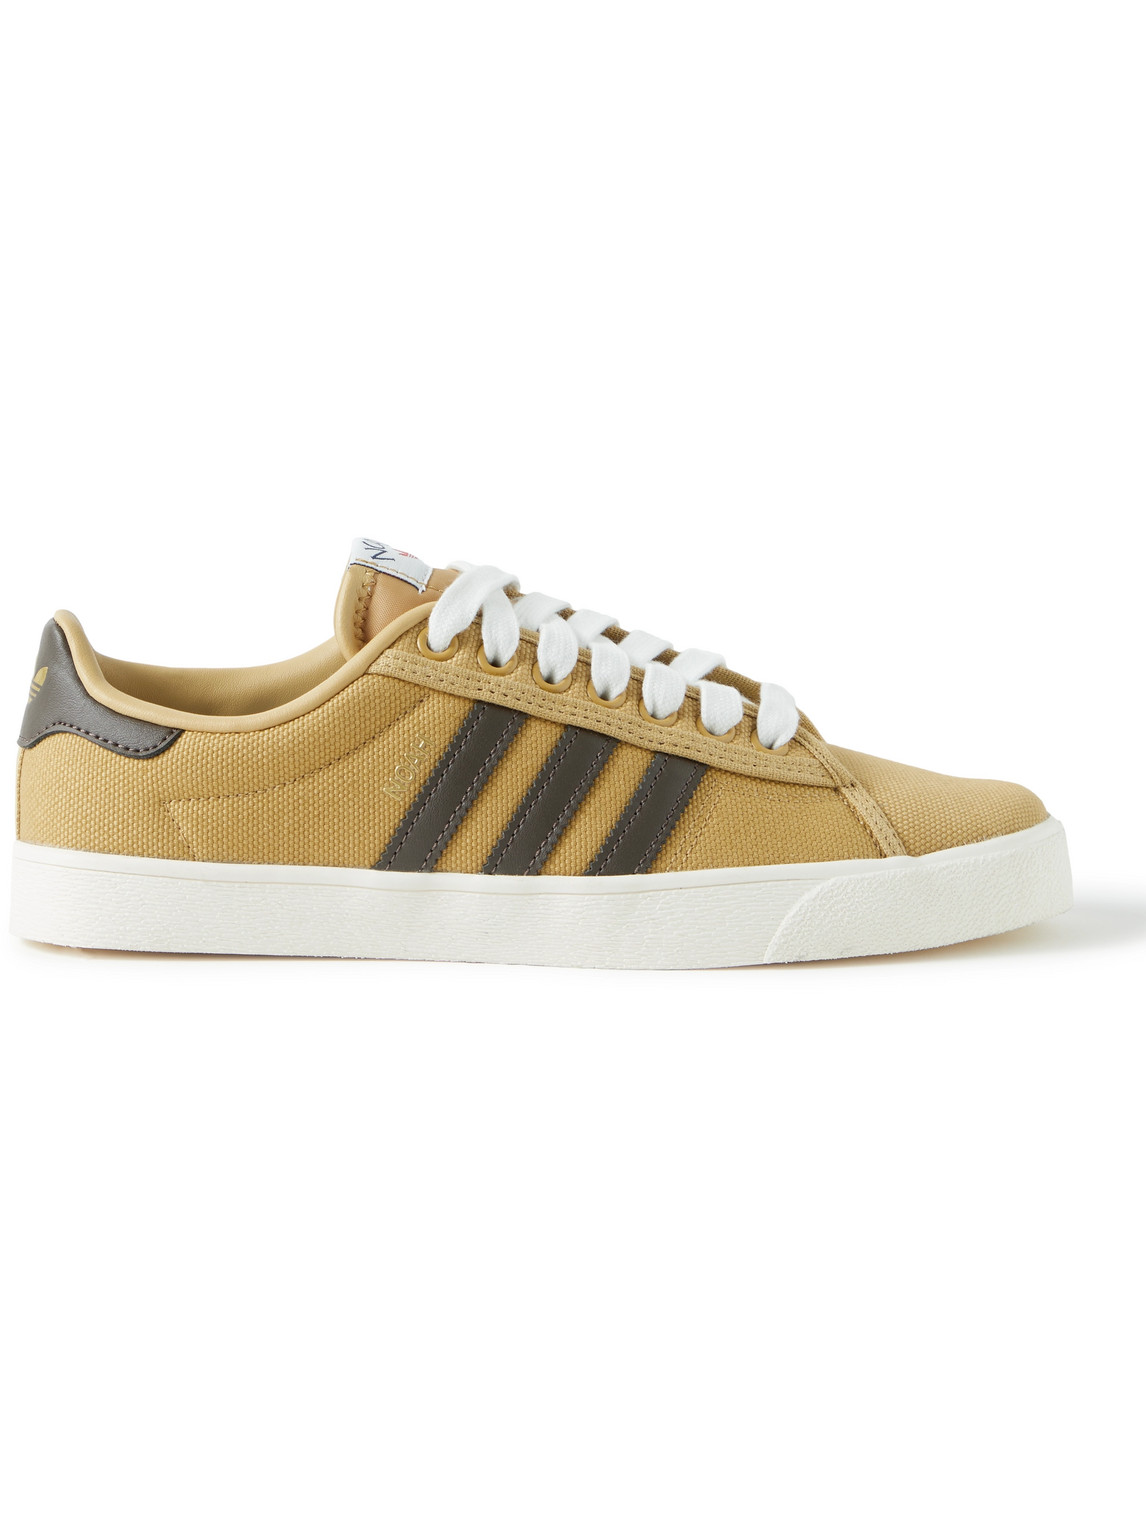 Adidas Consortium Noah Adria Leather-trimmed Canvas Sneakers In Brown